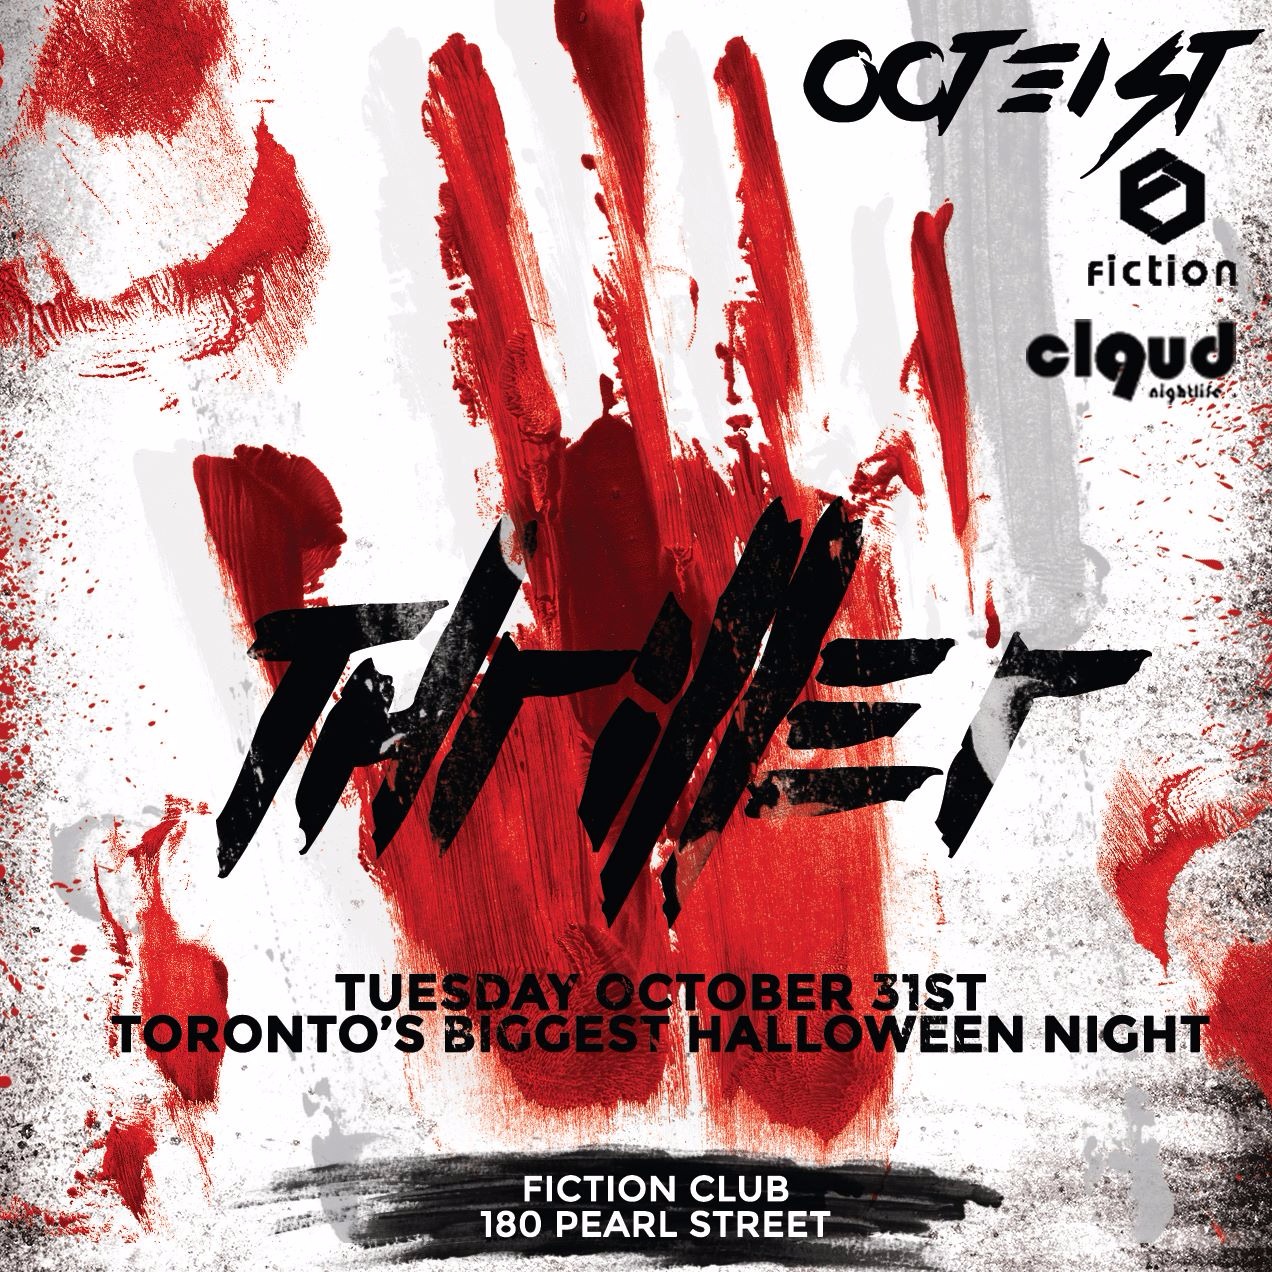 THRILLER @ Fiction // Tues Oct 31st | BIGGEST HALLOWEEN NIGHT IN THE CITY!